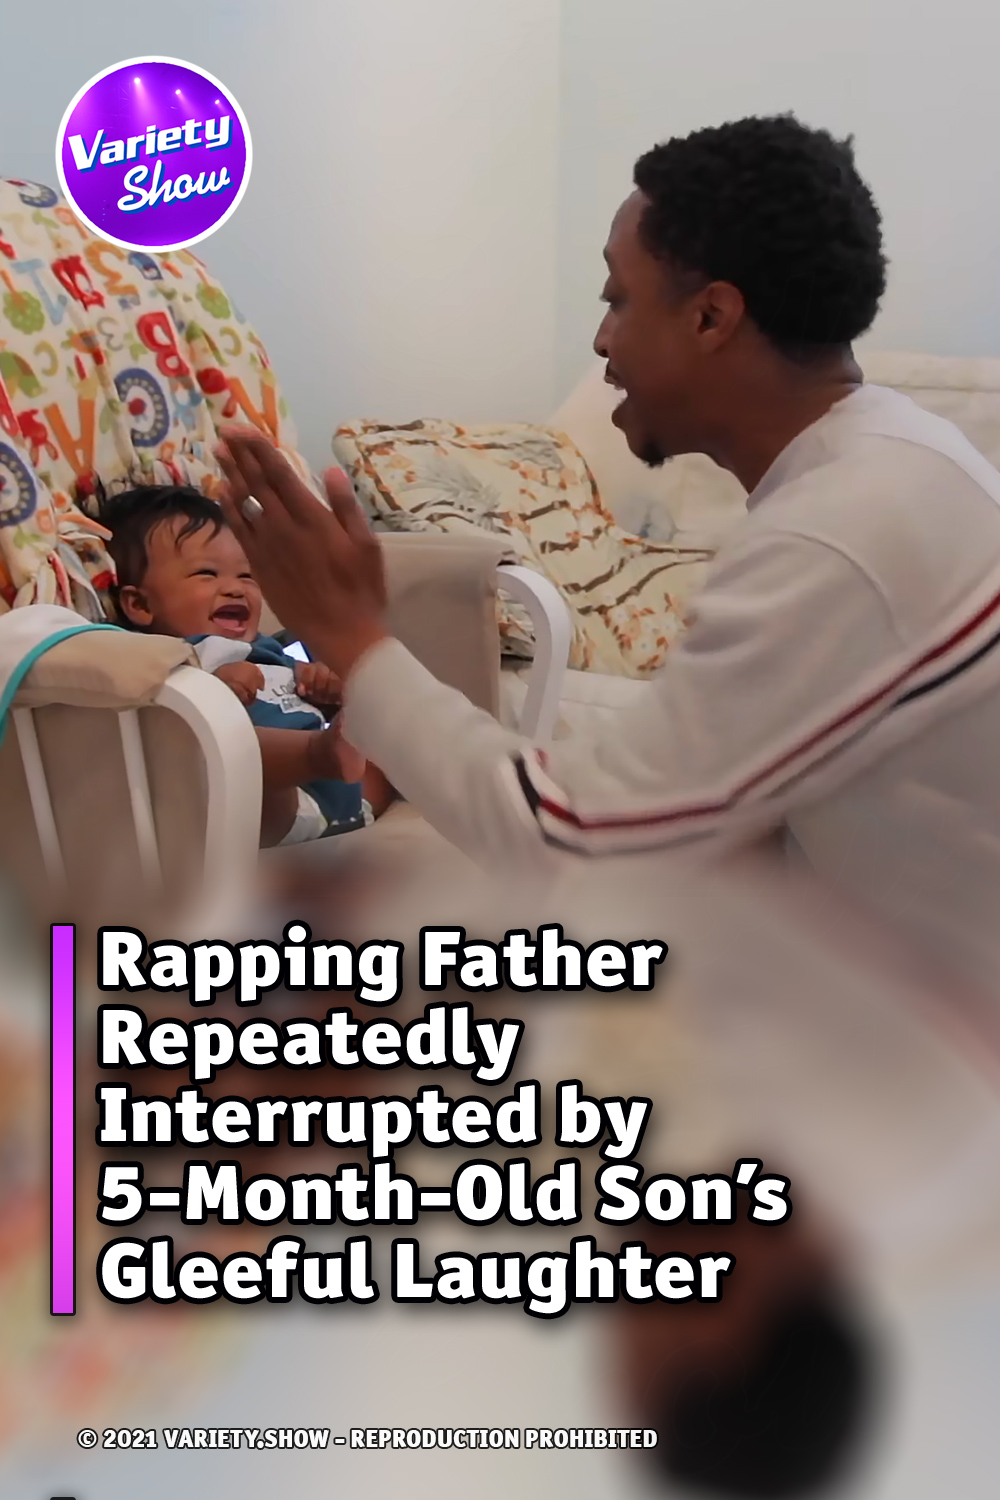 Rapping Father Repeatedly Interrupted by 5-Month-Old Son’s Gleeful Laughter